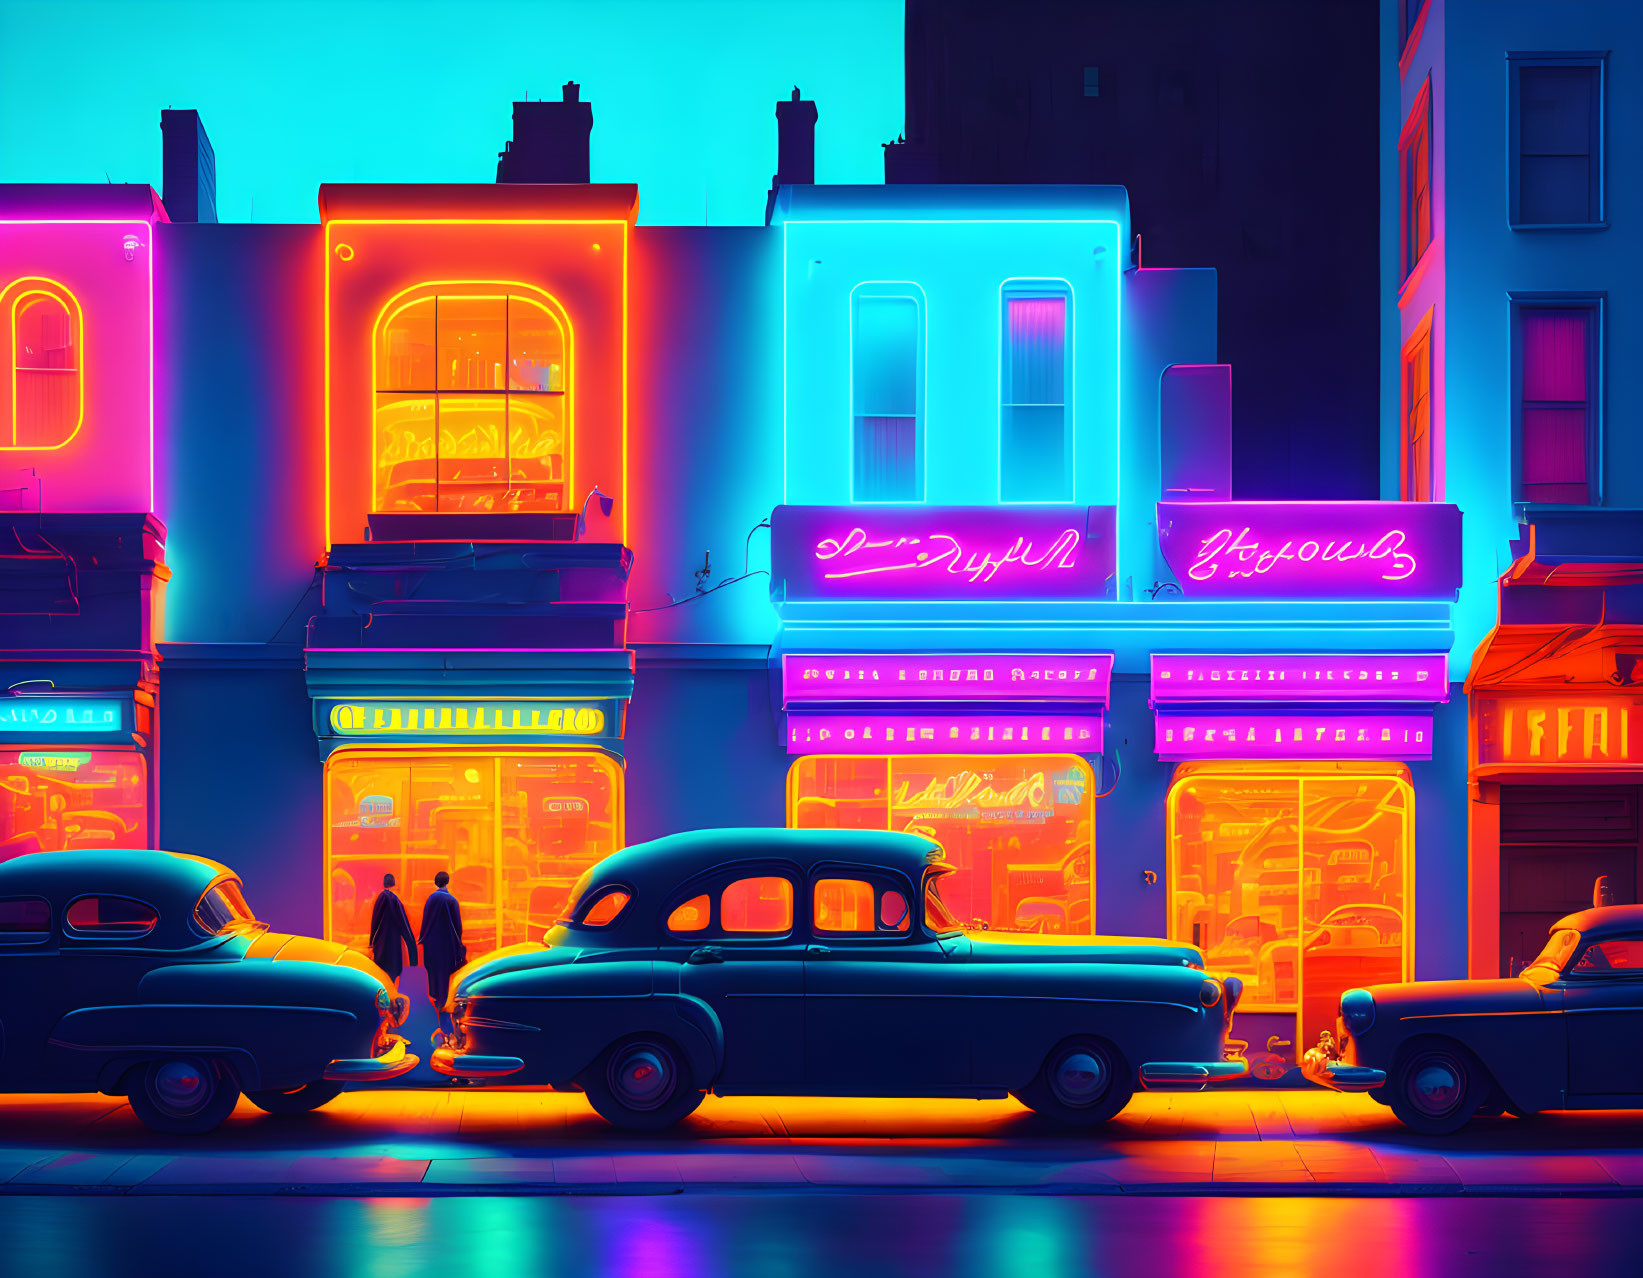 Neon-lit street scene at dusk with vintage cars and retro buildings